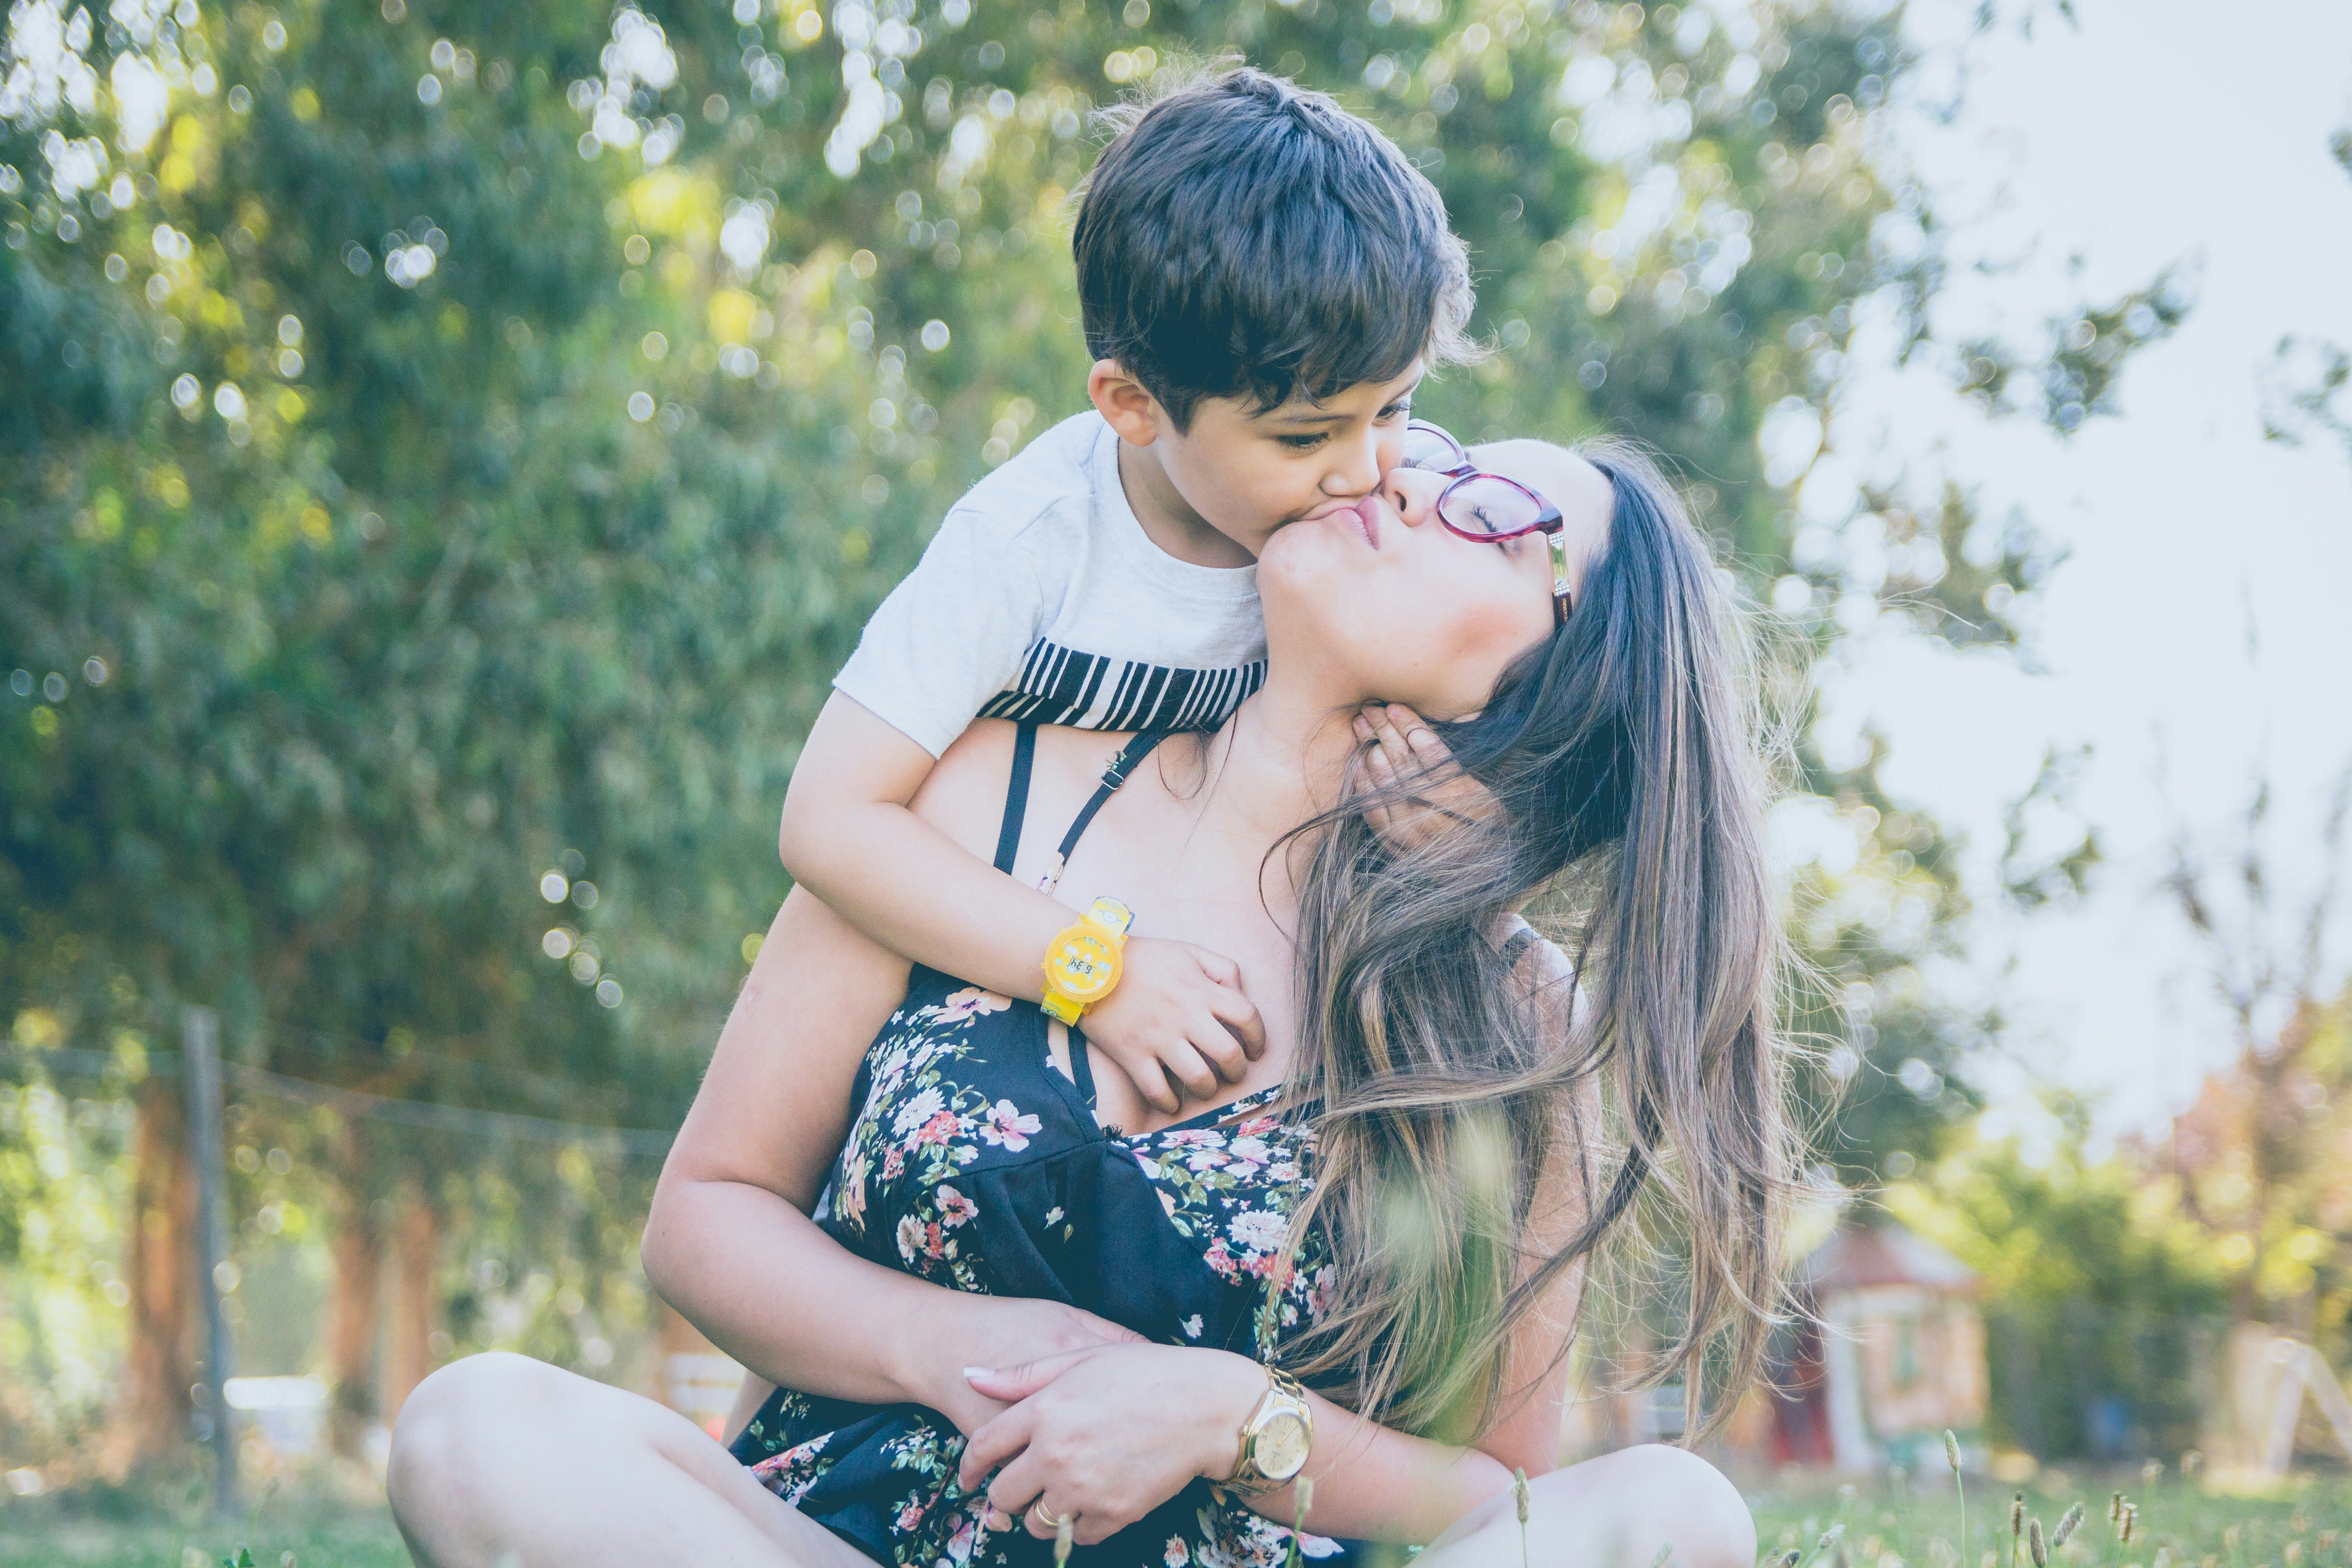 A mom with her son | Source: Unsplash